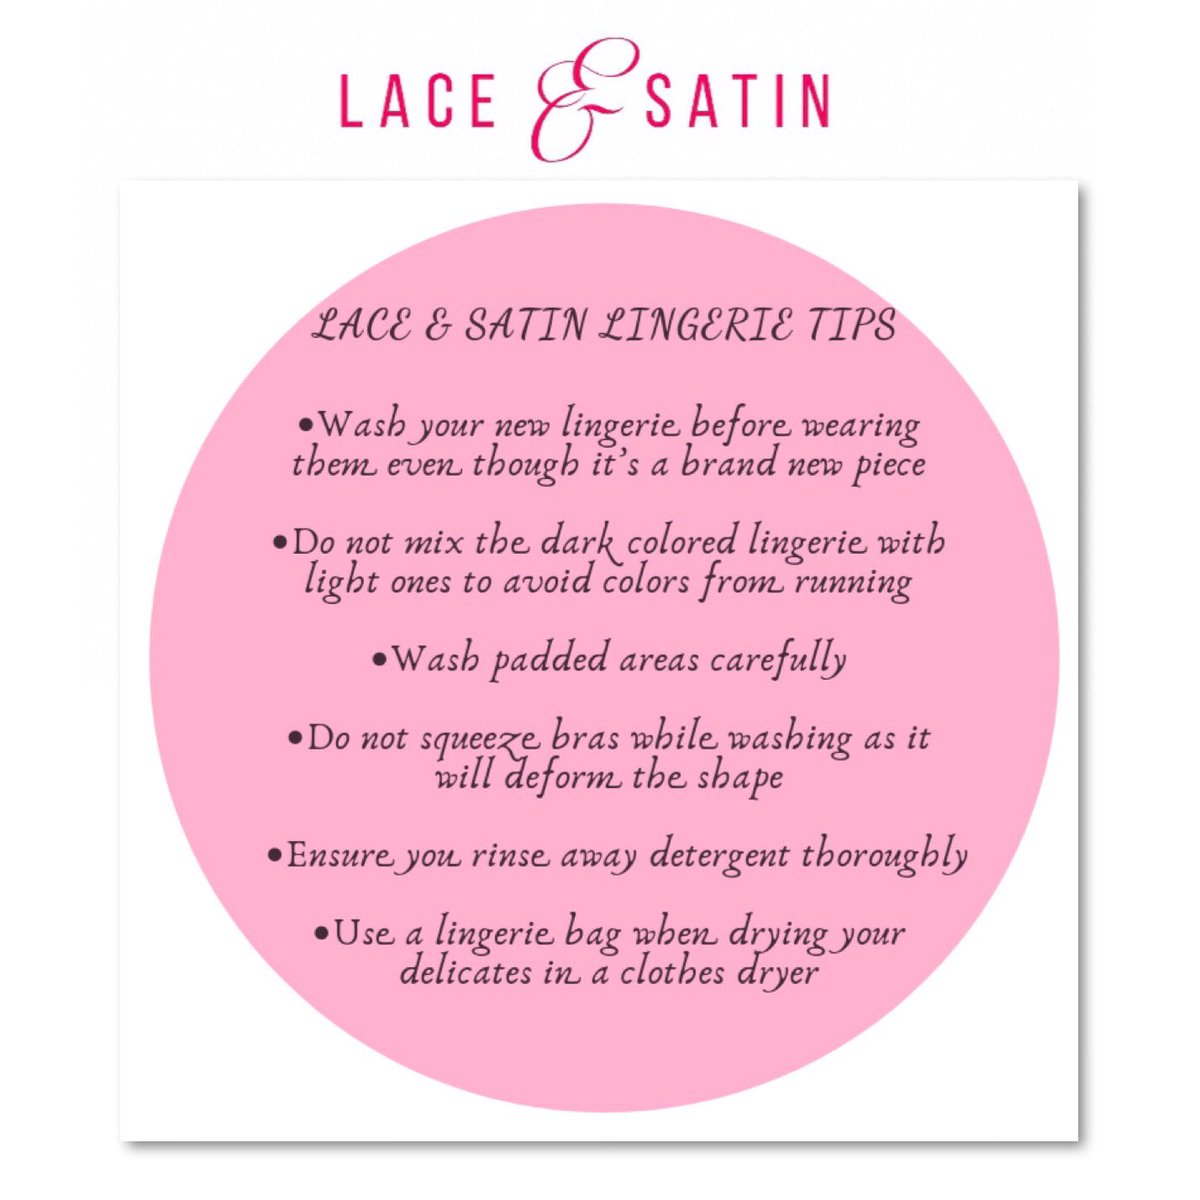 Hey Dolls!!!
Ever wondered how to properly wash your lingerie?? Here are a few tips on how to do so.
Remember cleanliness is a major part of being sexy 😉😉
#laceandsatin #underneathyourebeautiful #lingerie #lingerieaddict #lingerieonline #lingerieshop #lingerieinnigeria